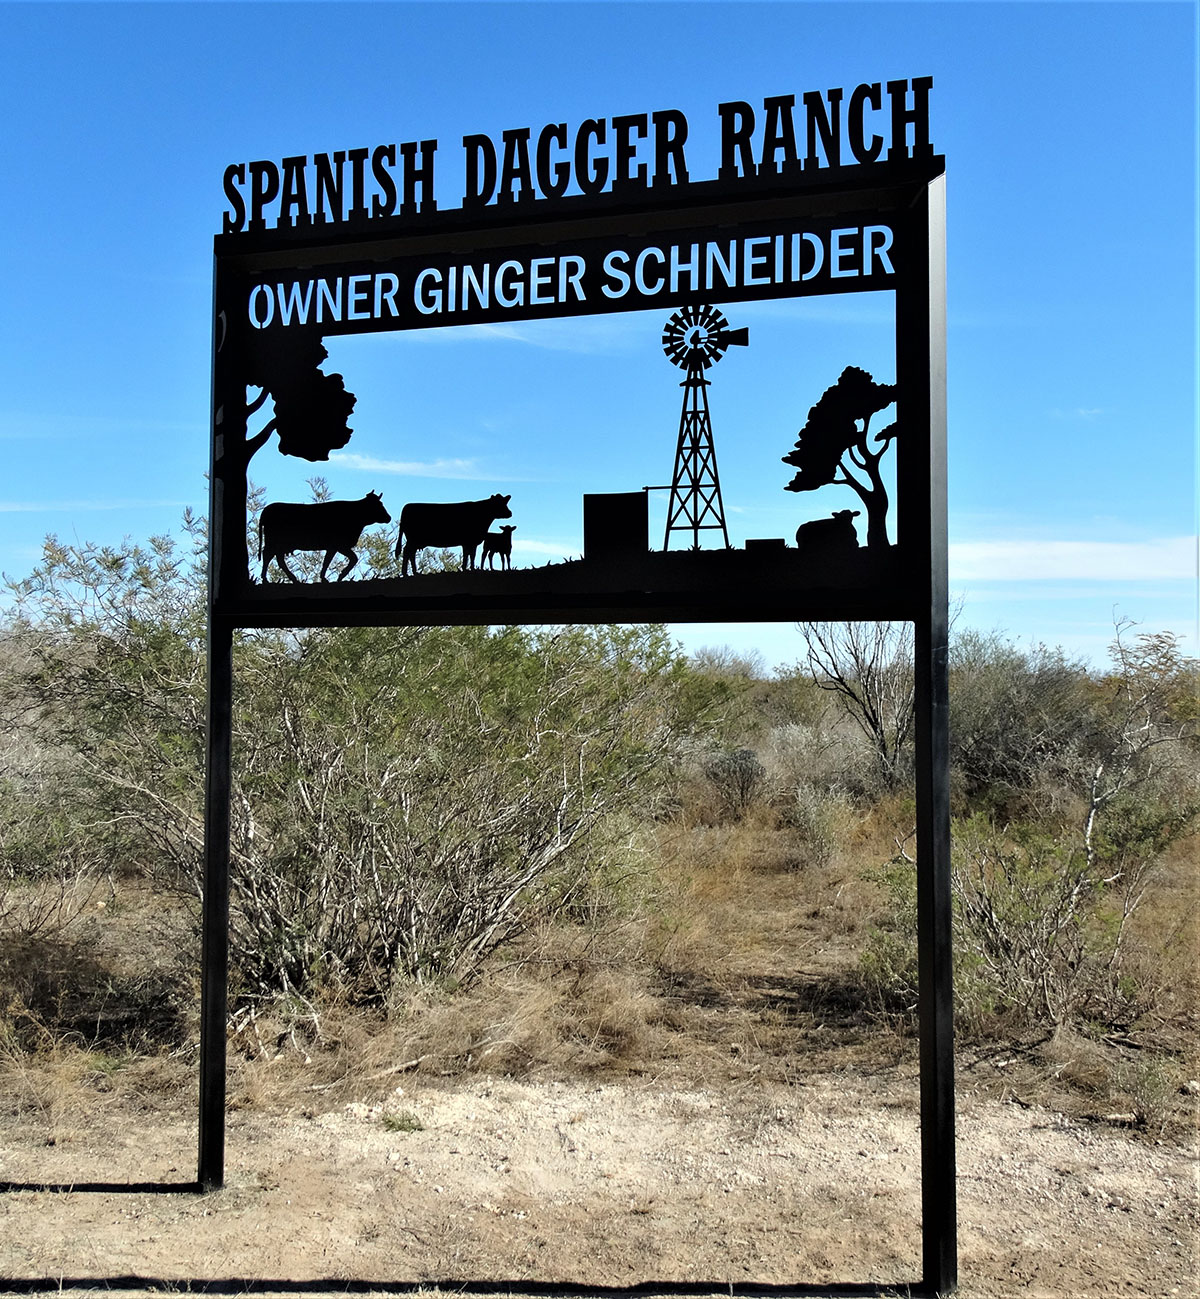 A metal works sign says Spanish Dagger Ranch, Owner Ginger Schneider located outside. 